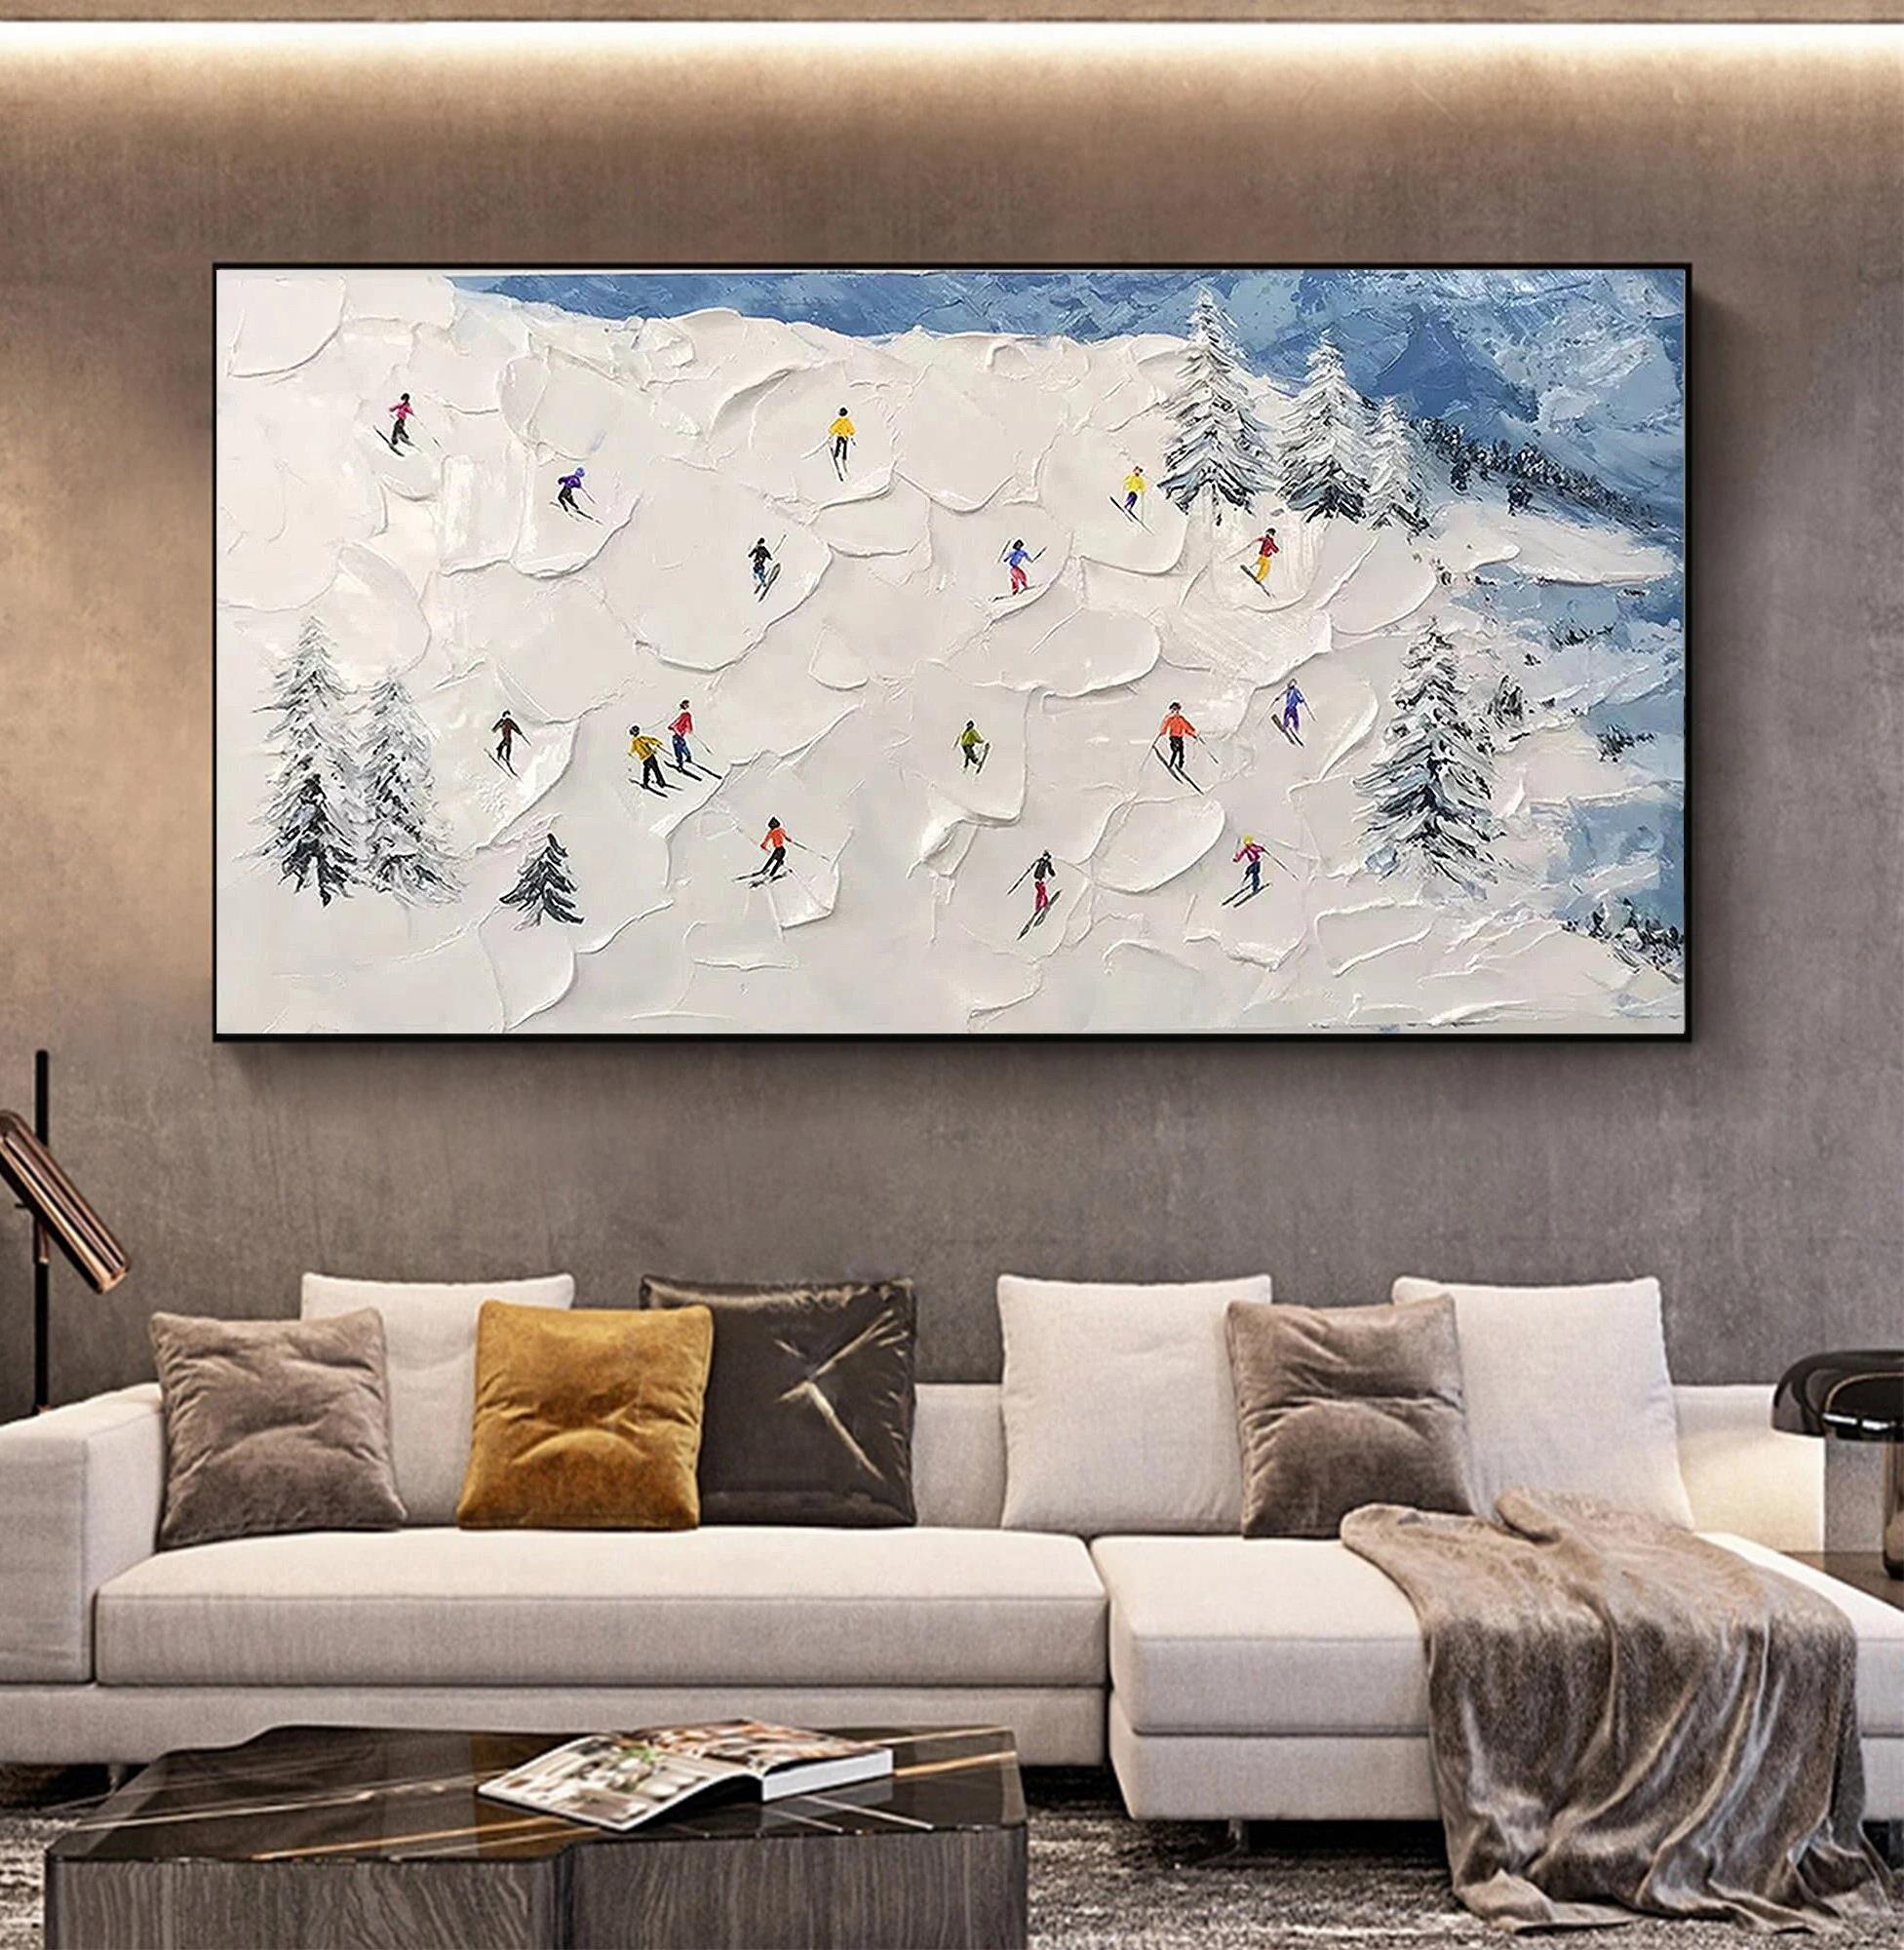 Skier on Snowy Mountain snow by Palette Knife wall art minimalism Oil Paintings